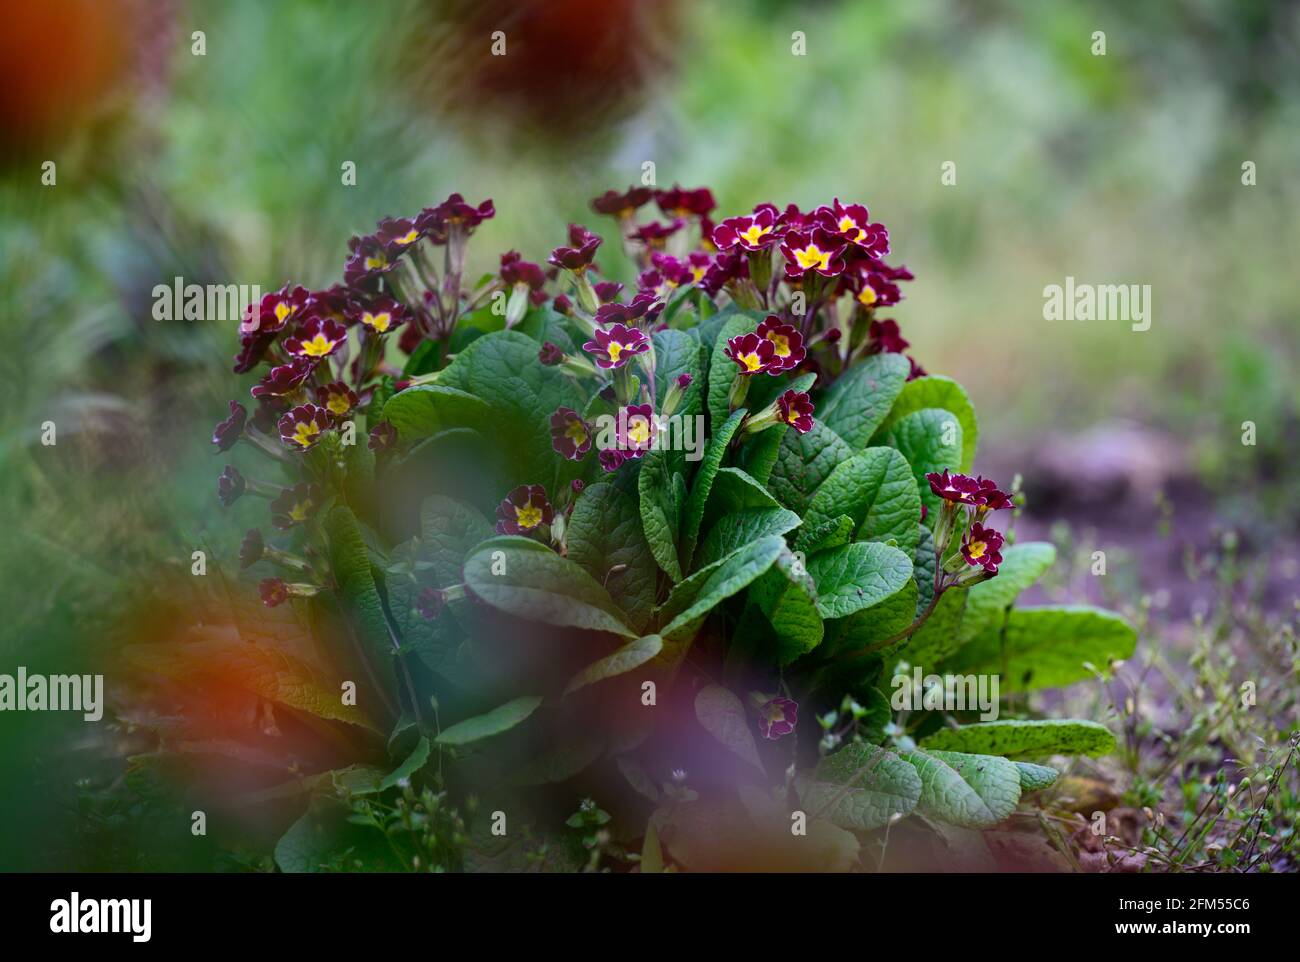 bush with large green leaves and red flowers Primula acaulis in the garden on a spring afternoon Stock Photo